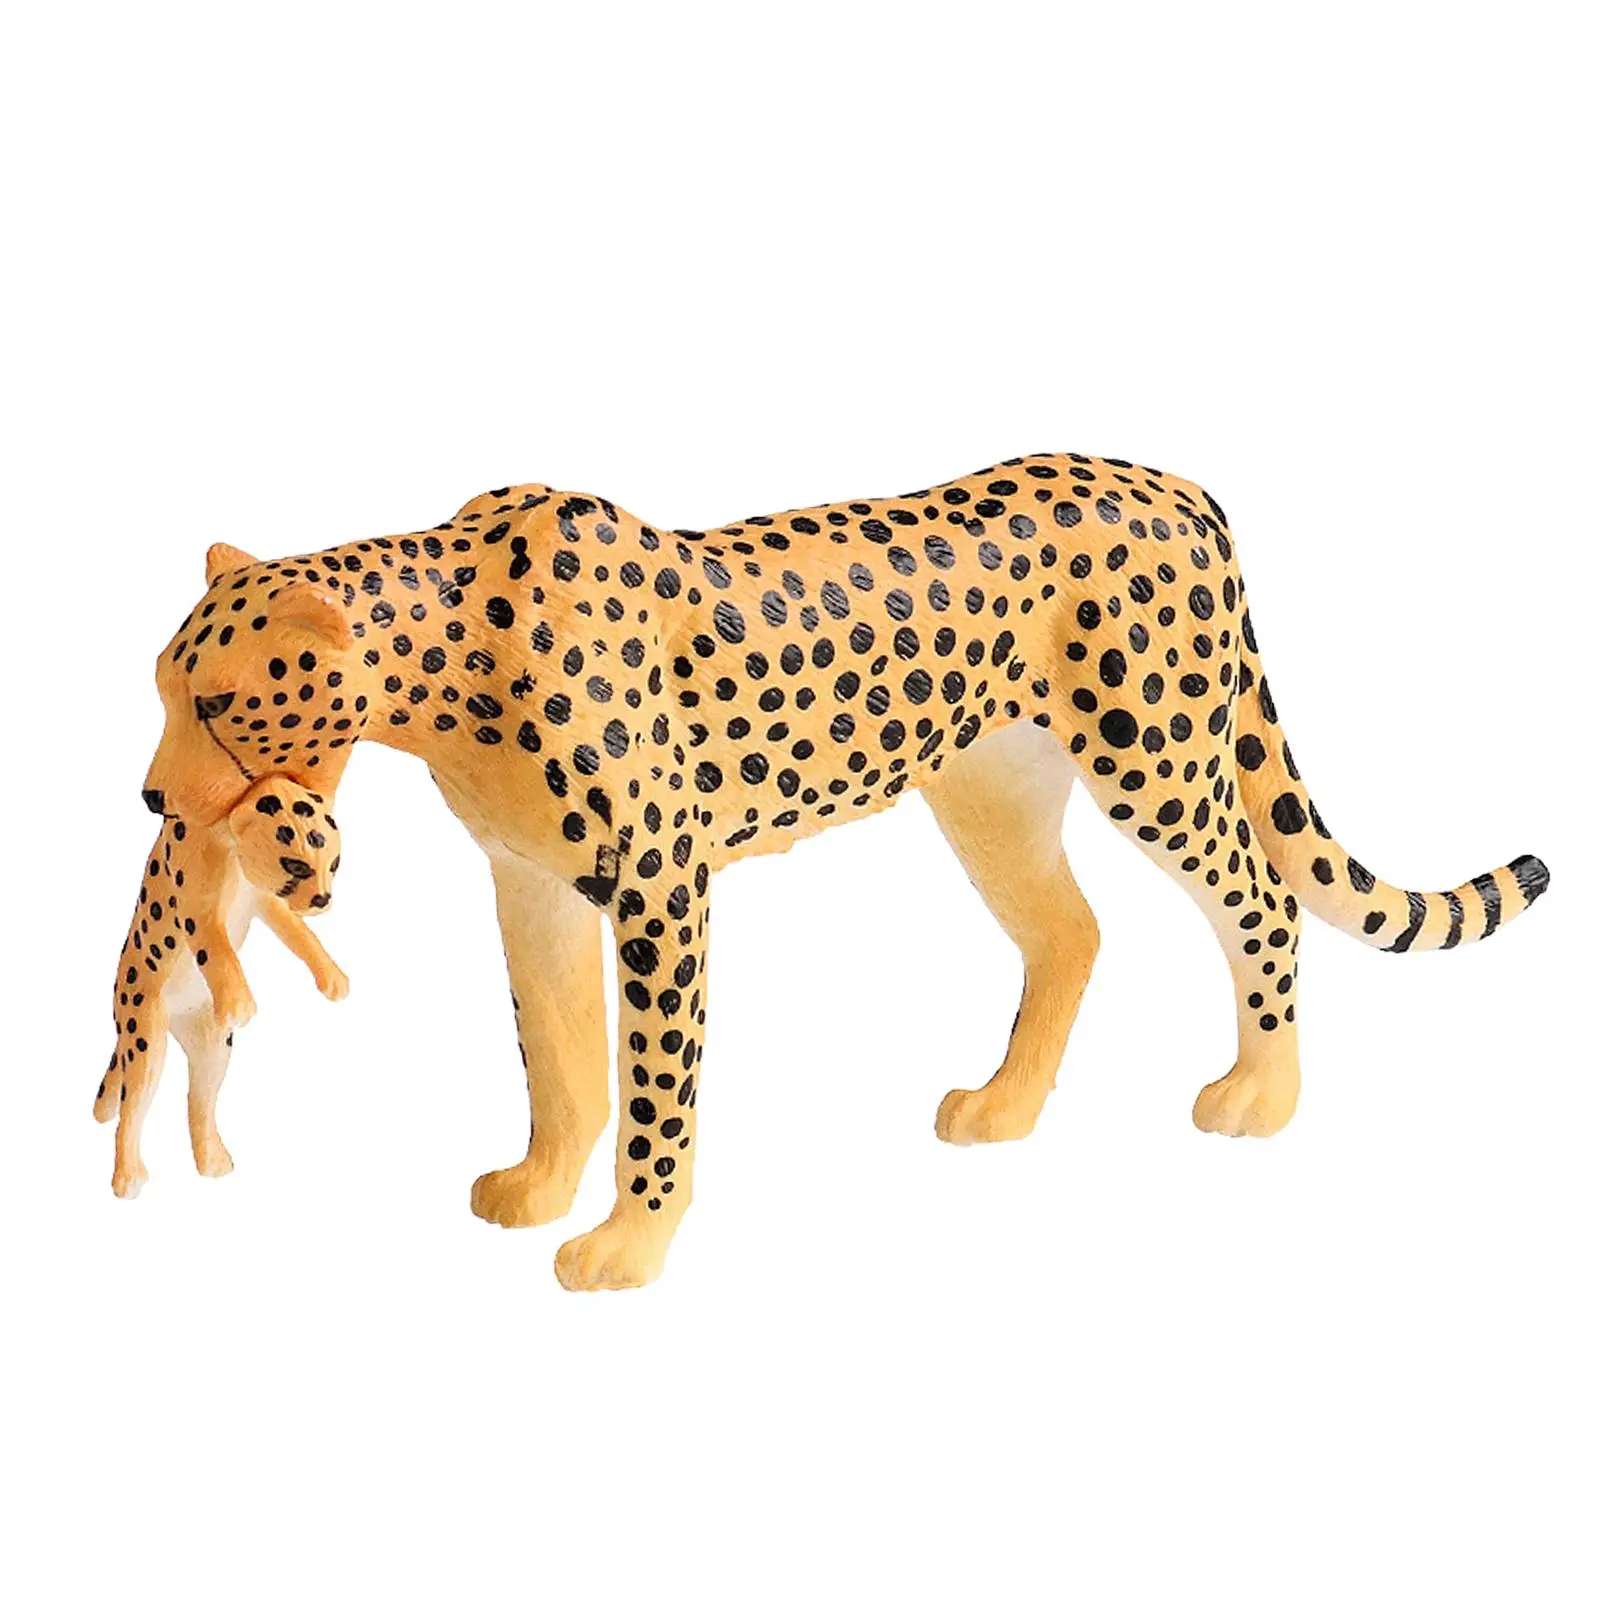 Leopard Figurine Preschool Cheetah Playset for Educational Toys Party Favors